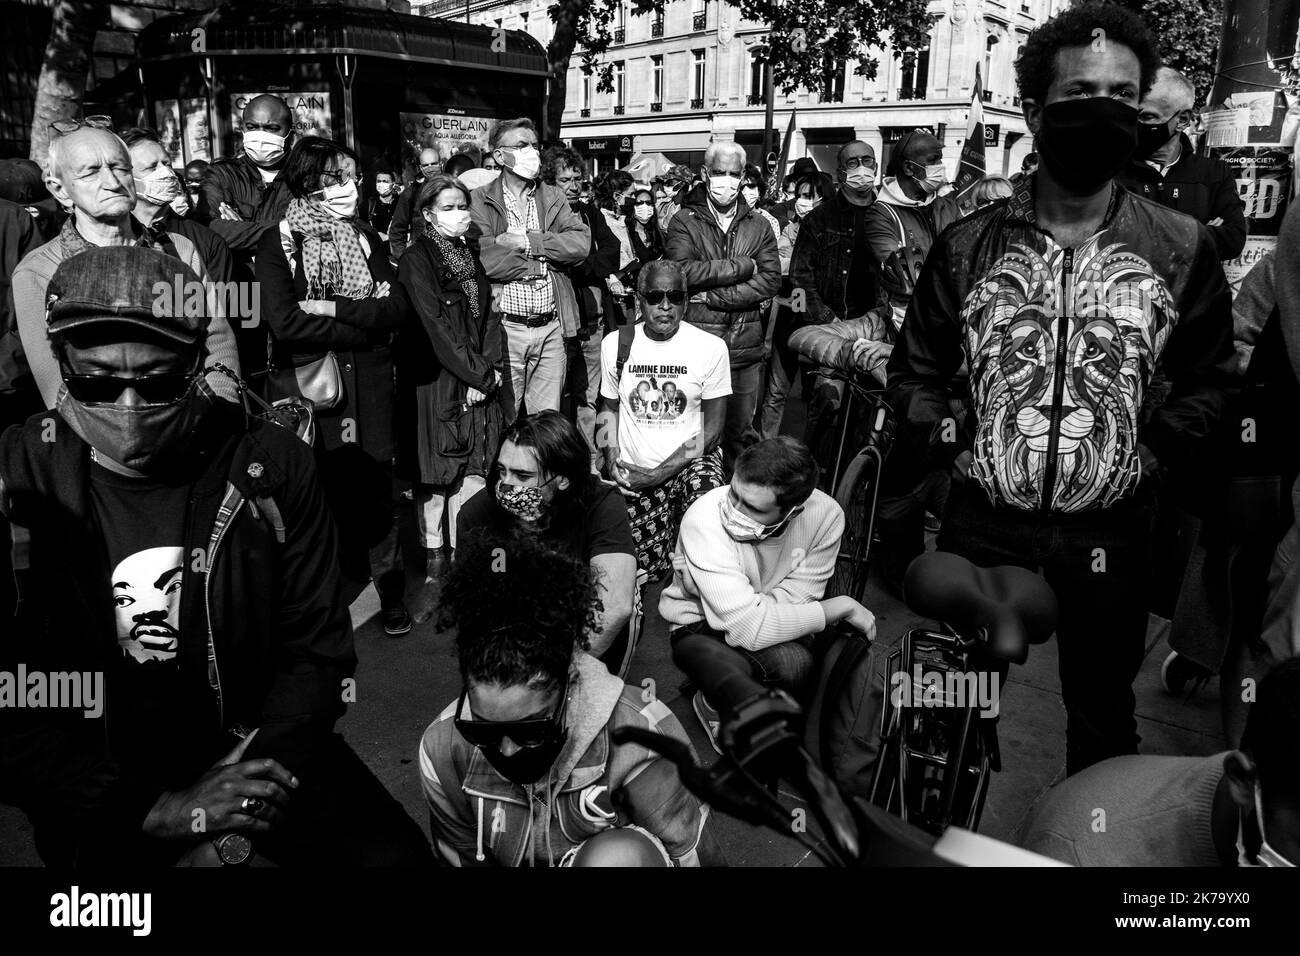 France / Ile-de-France (region) / Paris  -  Rally Place de la Republique in tribute to George Floyd, who died during his arrest by a white police officer, Derek Chauvin, on May 25, 2020 in Minneapolis, Minnesota in the United States. June 9, 2020. Paris, France. Stock Photo